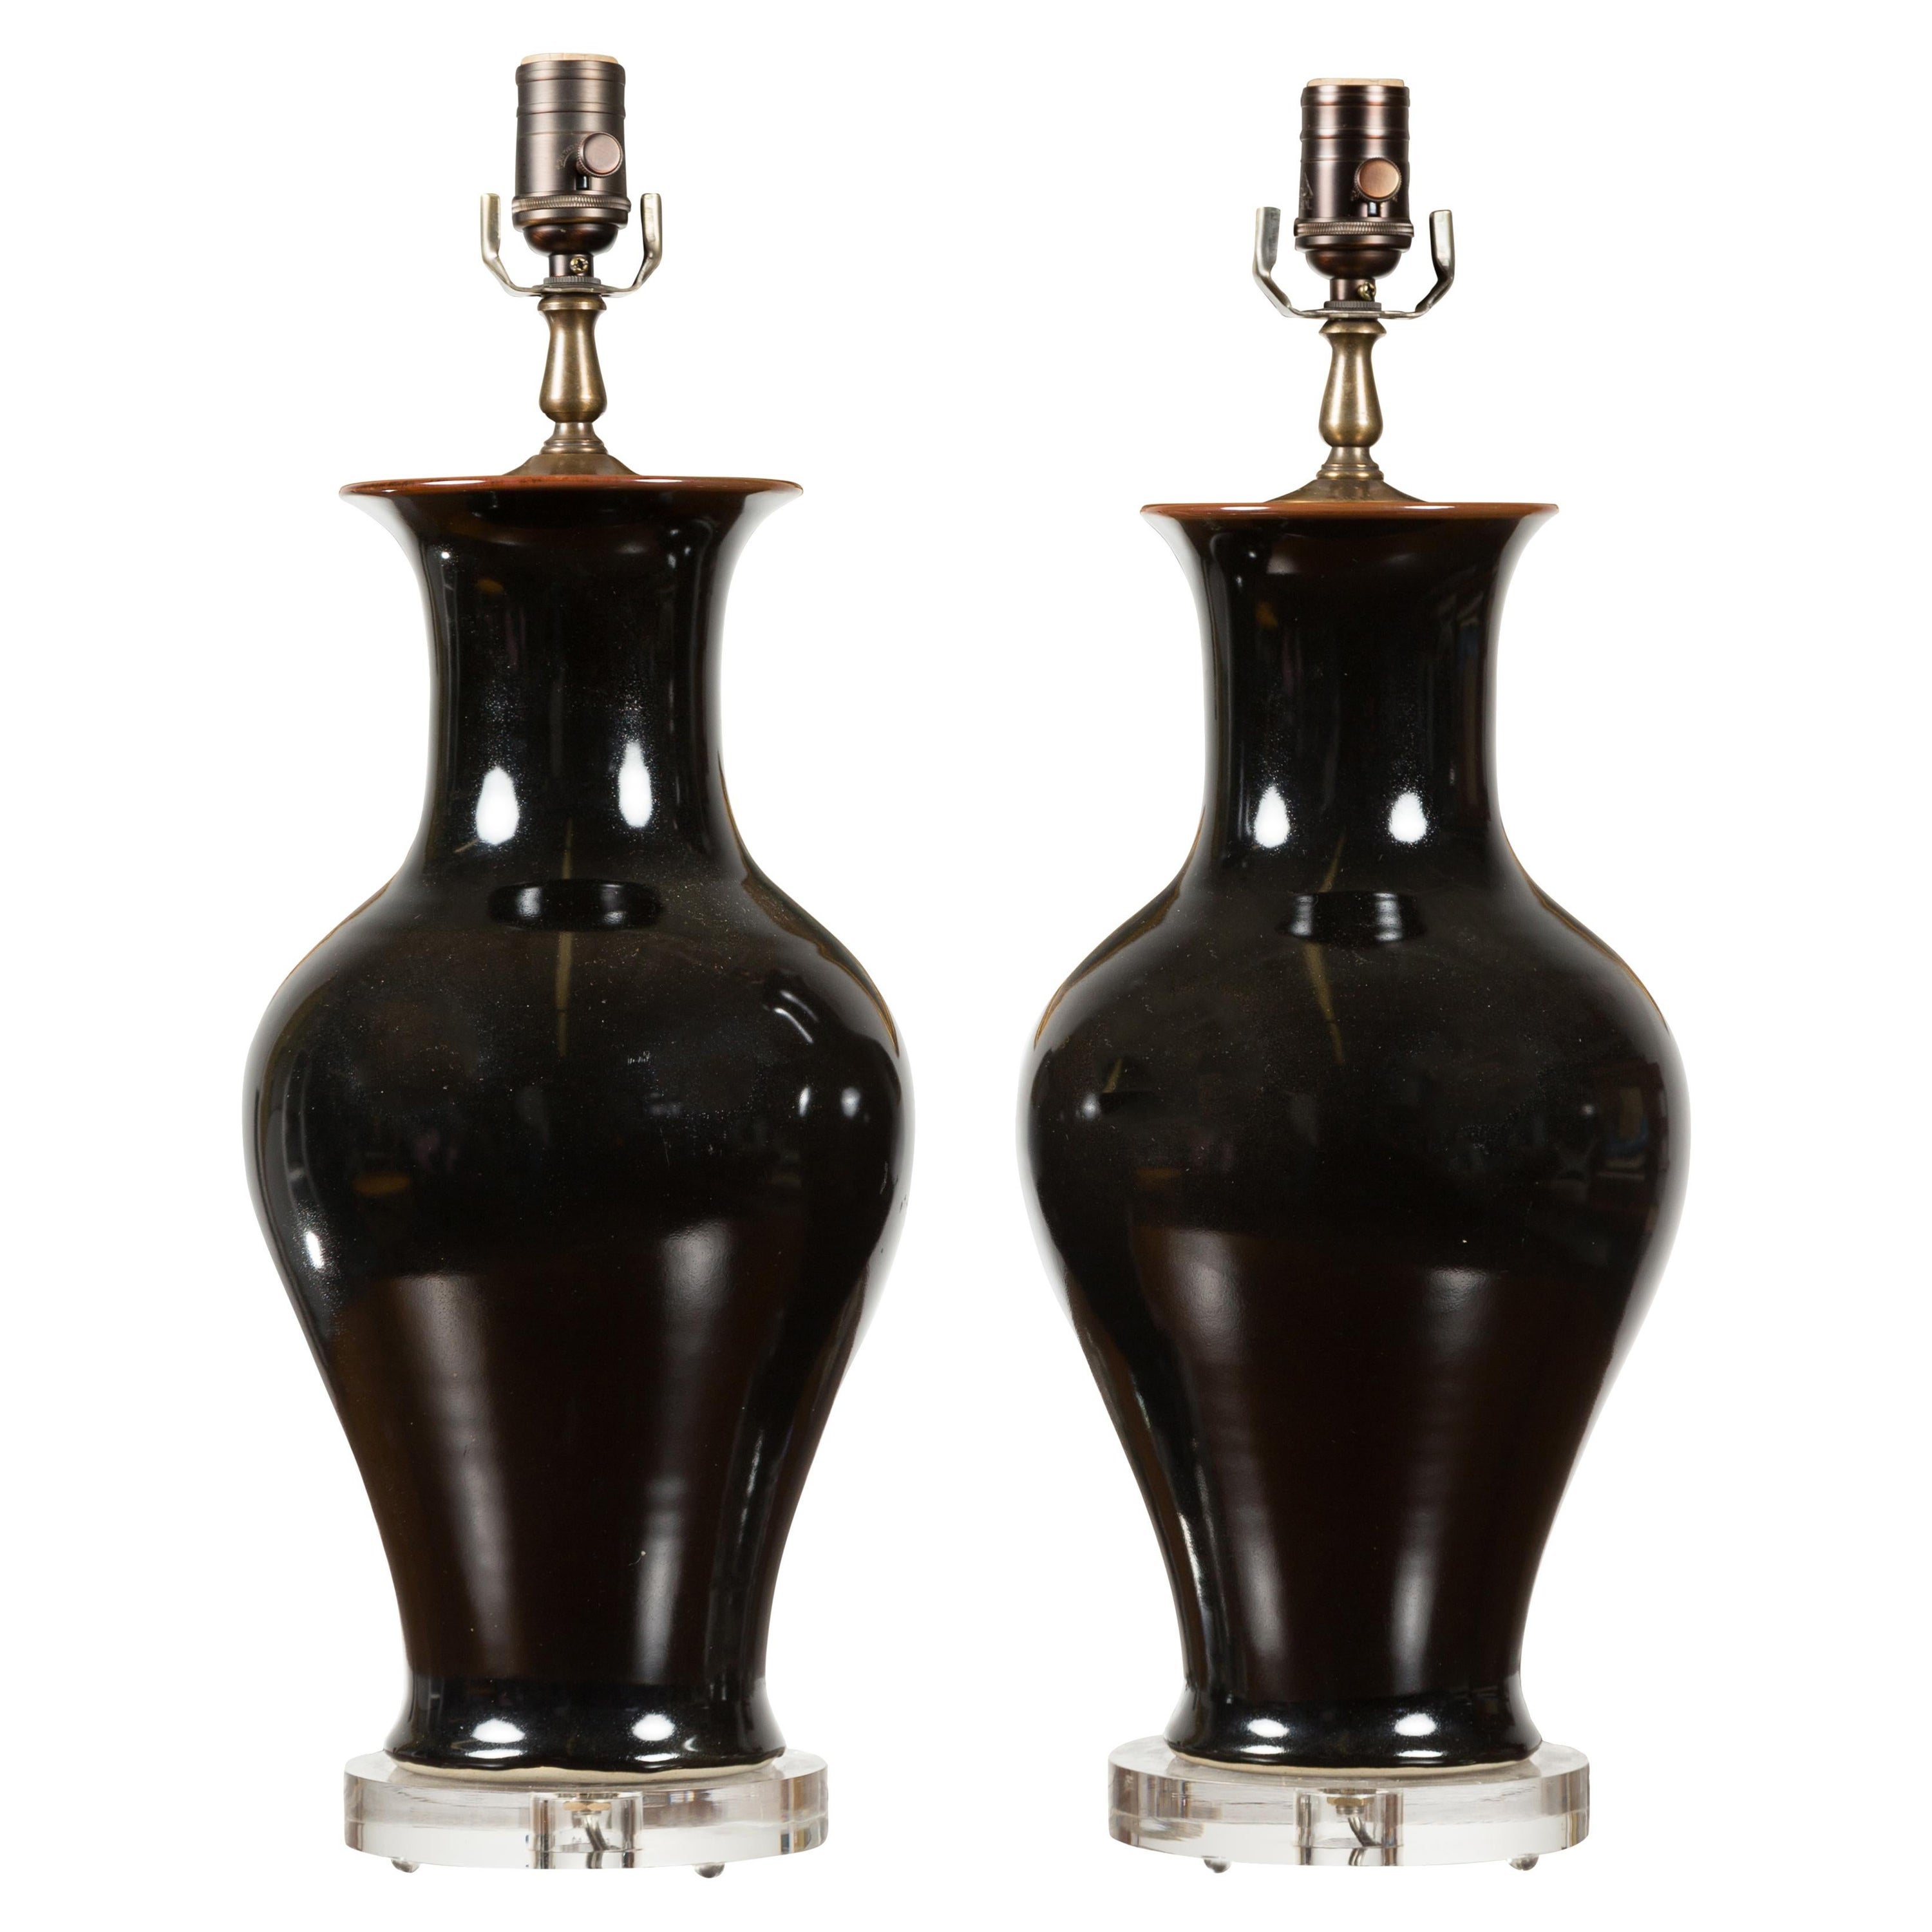 Pair of Black Porcelain Vase Shaped Table Lamps with Round Lucite Bases, Wired For Sale